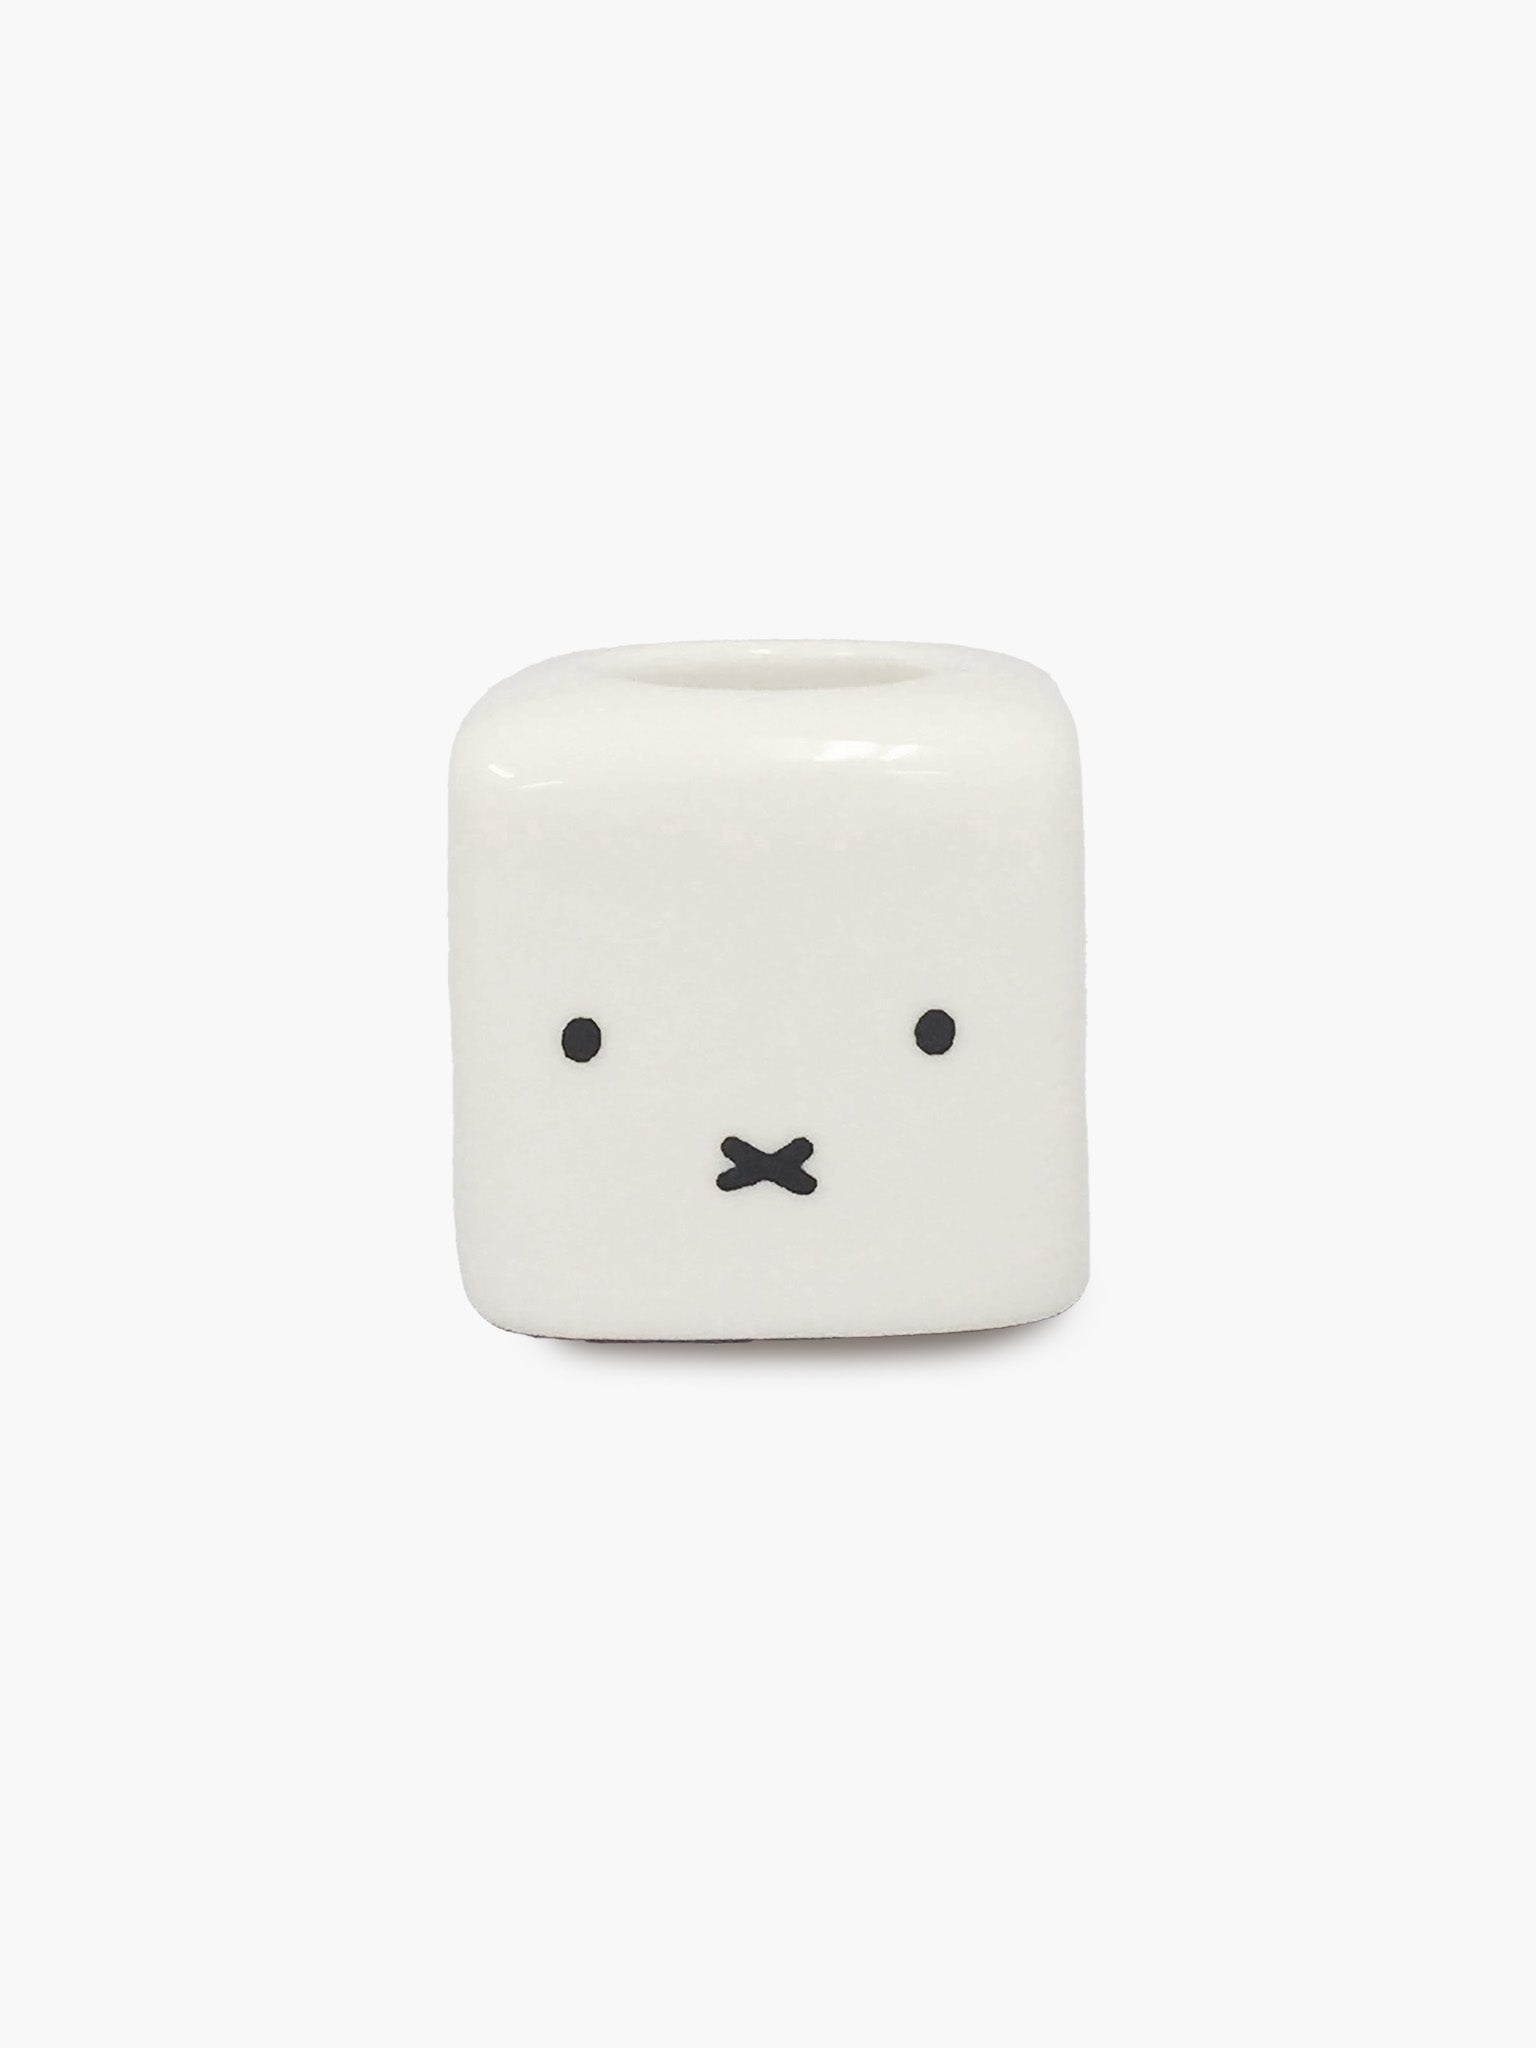 Miffy Toothbrush Holder - Square